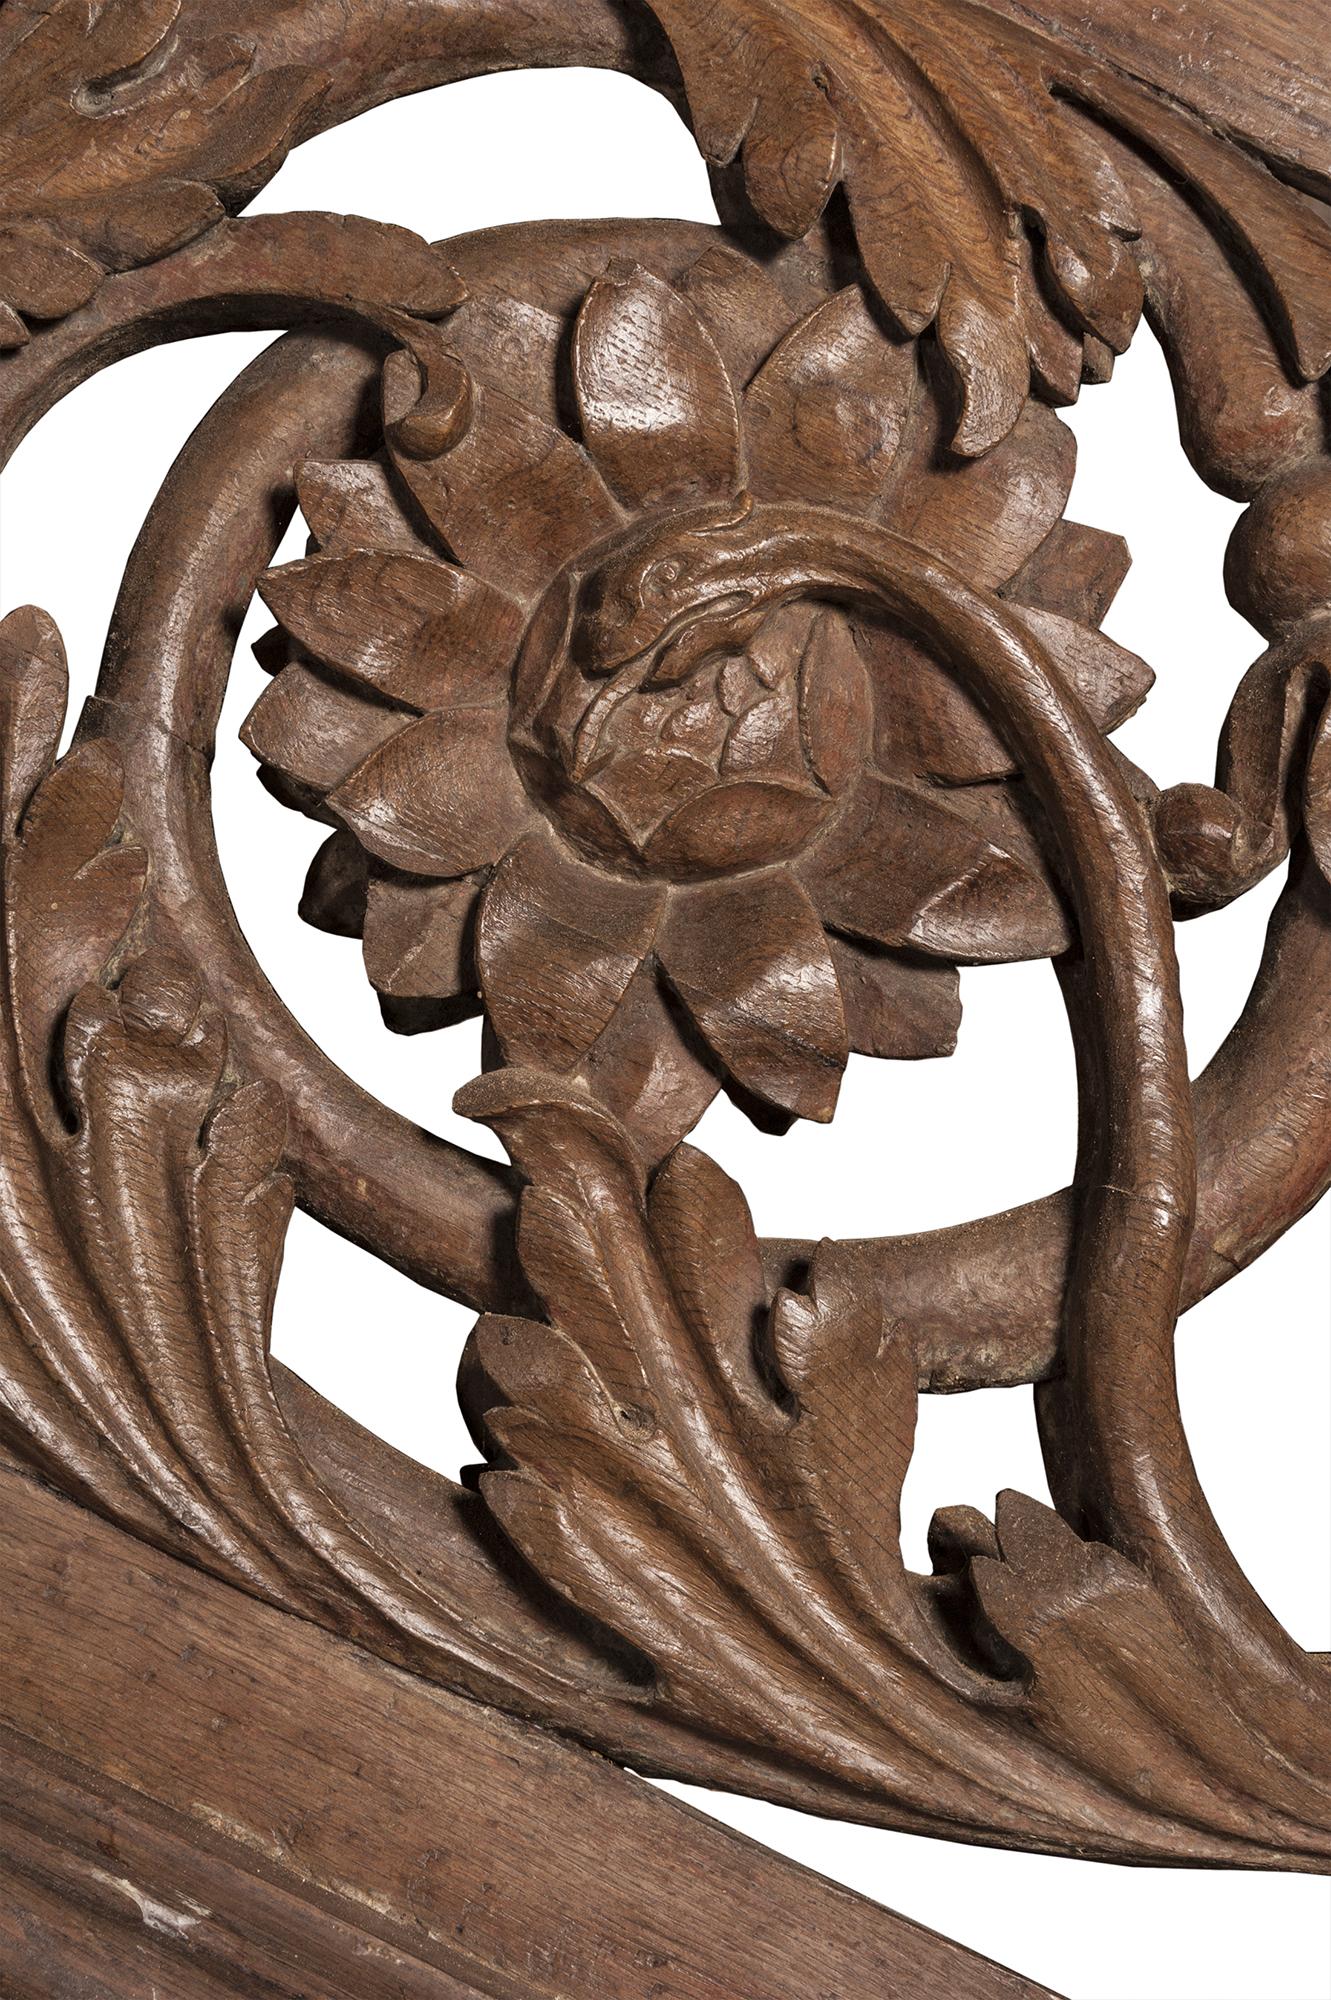 A mid to late 17th century carved oak staircase with accompanying pine panelling; this stair was rescued prior to Crakemarsh Hall’s demolition. Nikolaus Pevsner in the 1950s described Crakemarsh Hall as a ‘compact two story stucco villa circa 1820,